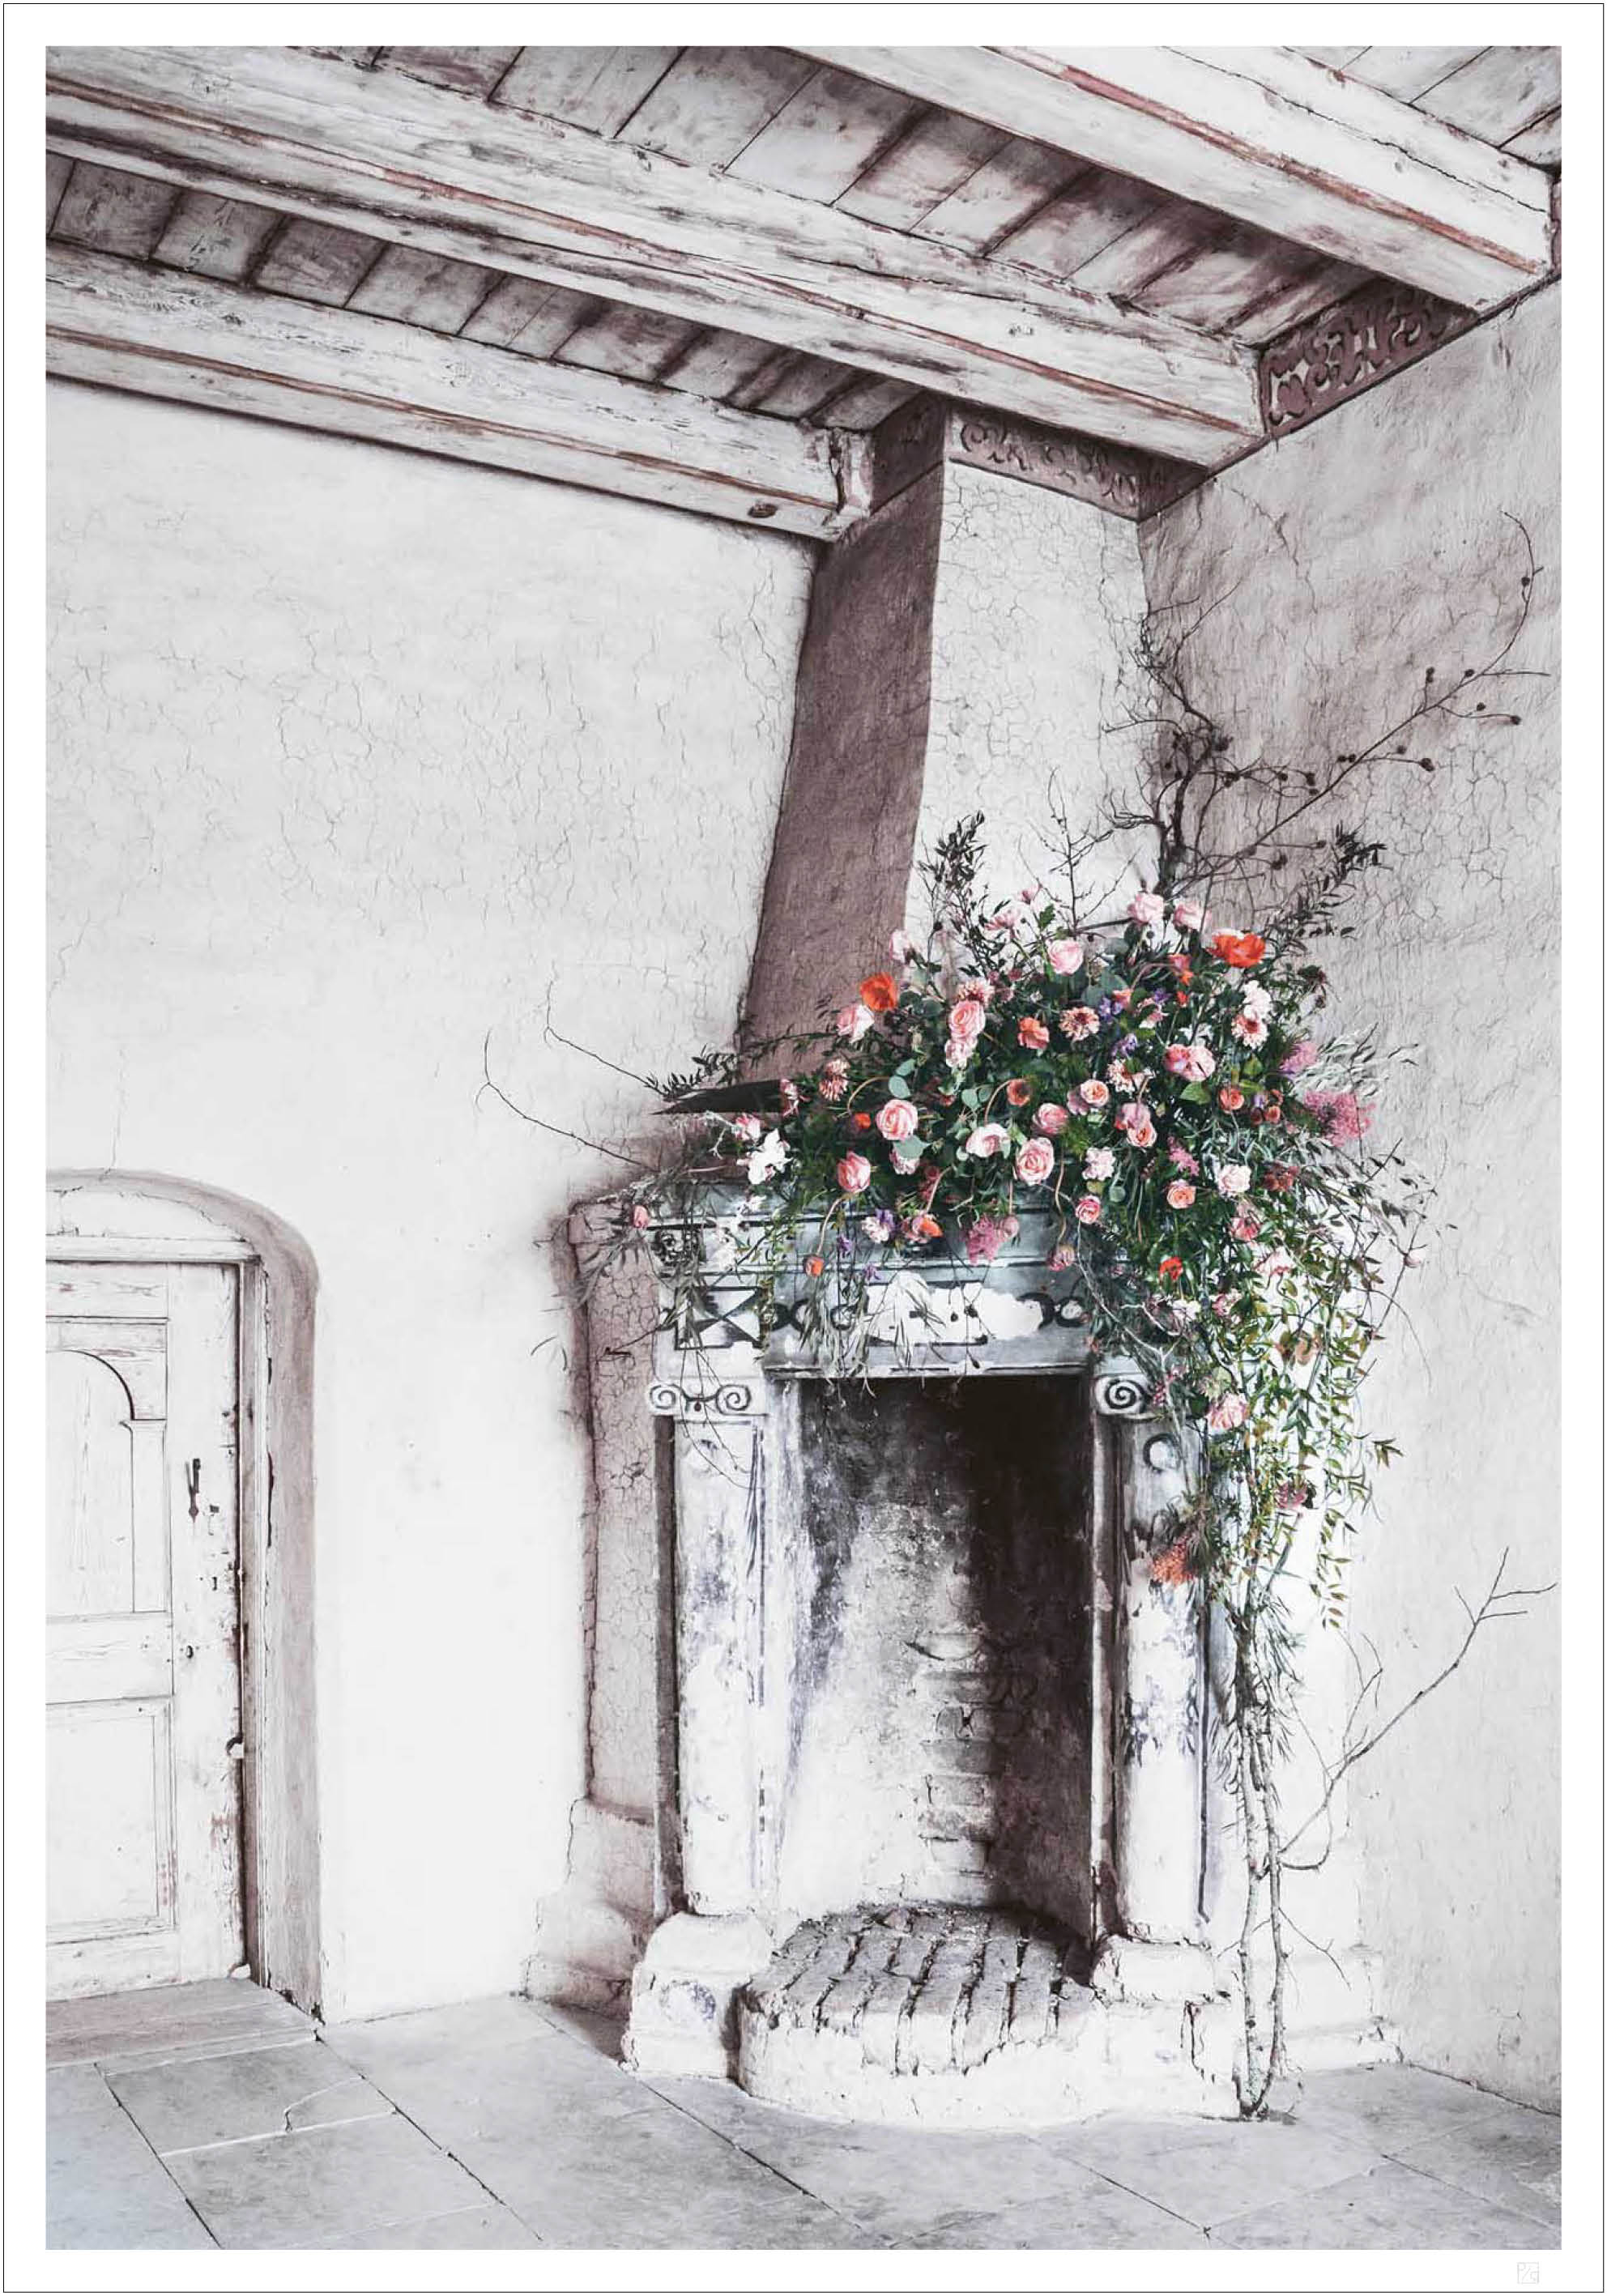 Fireplace with flowers